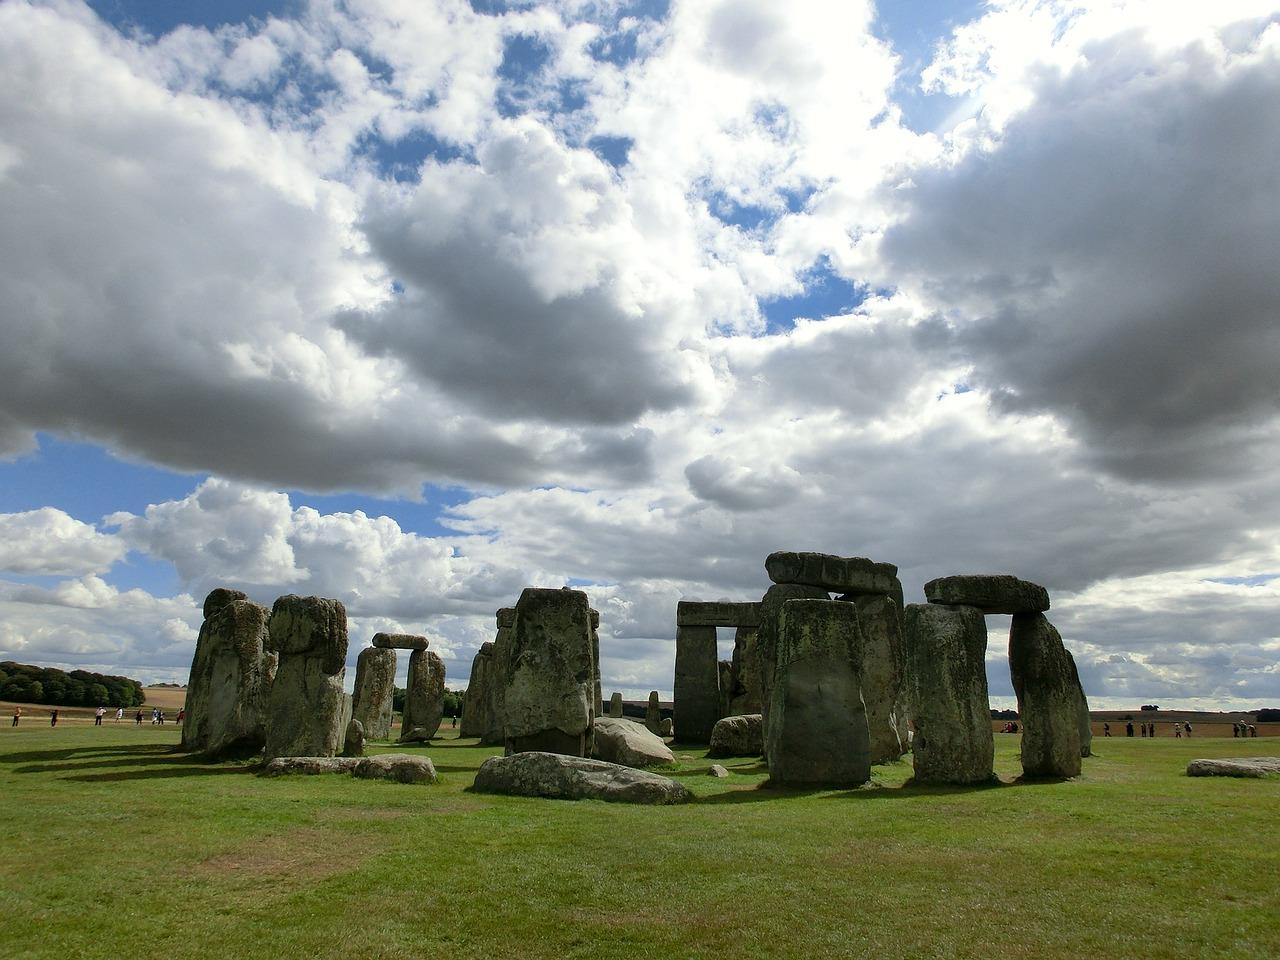 Getting to Stonehenge from London: how to get there by bus or train